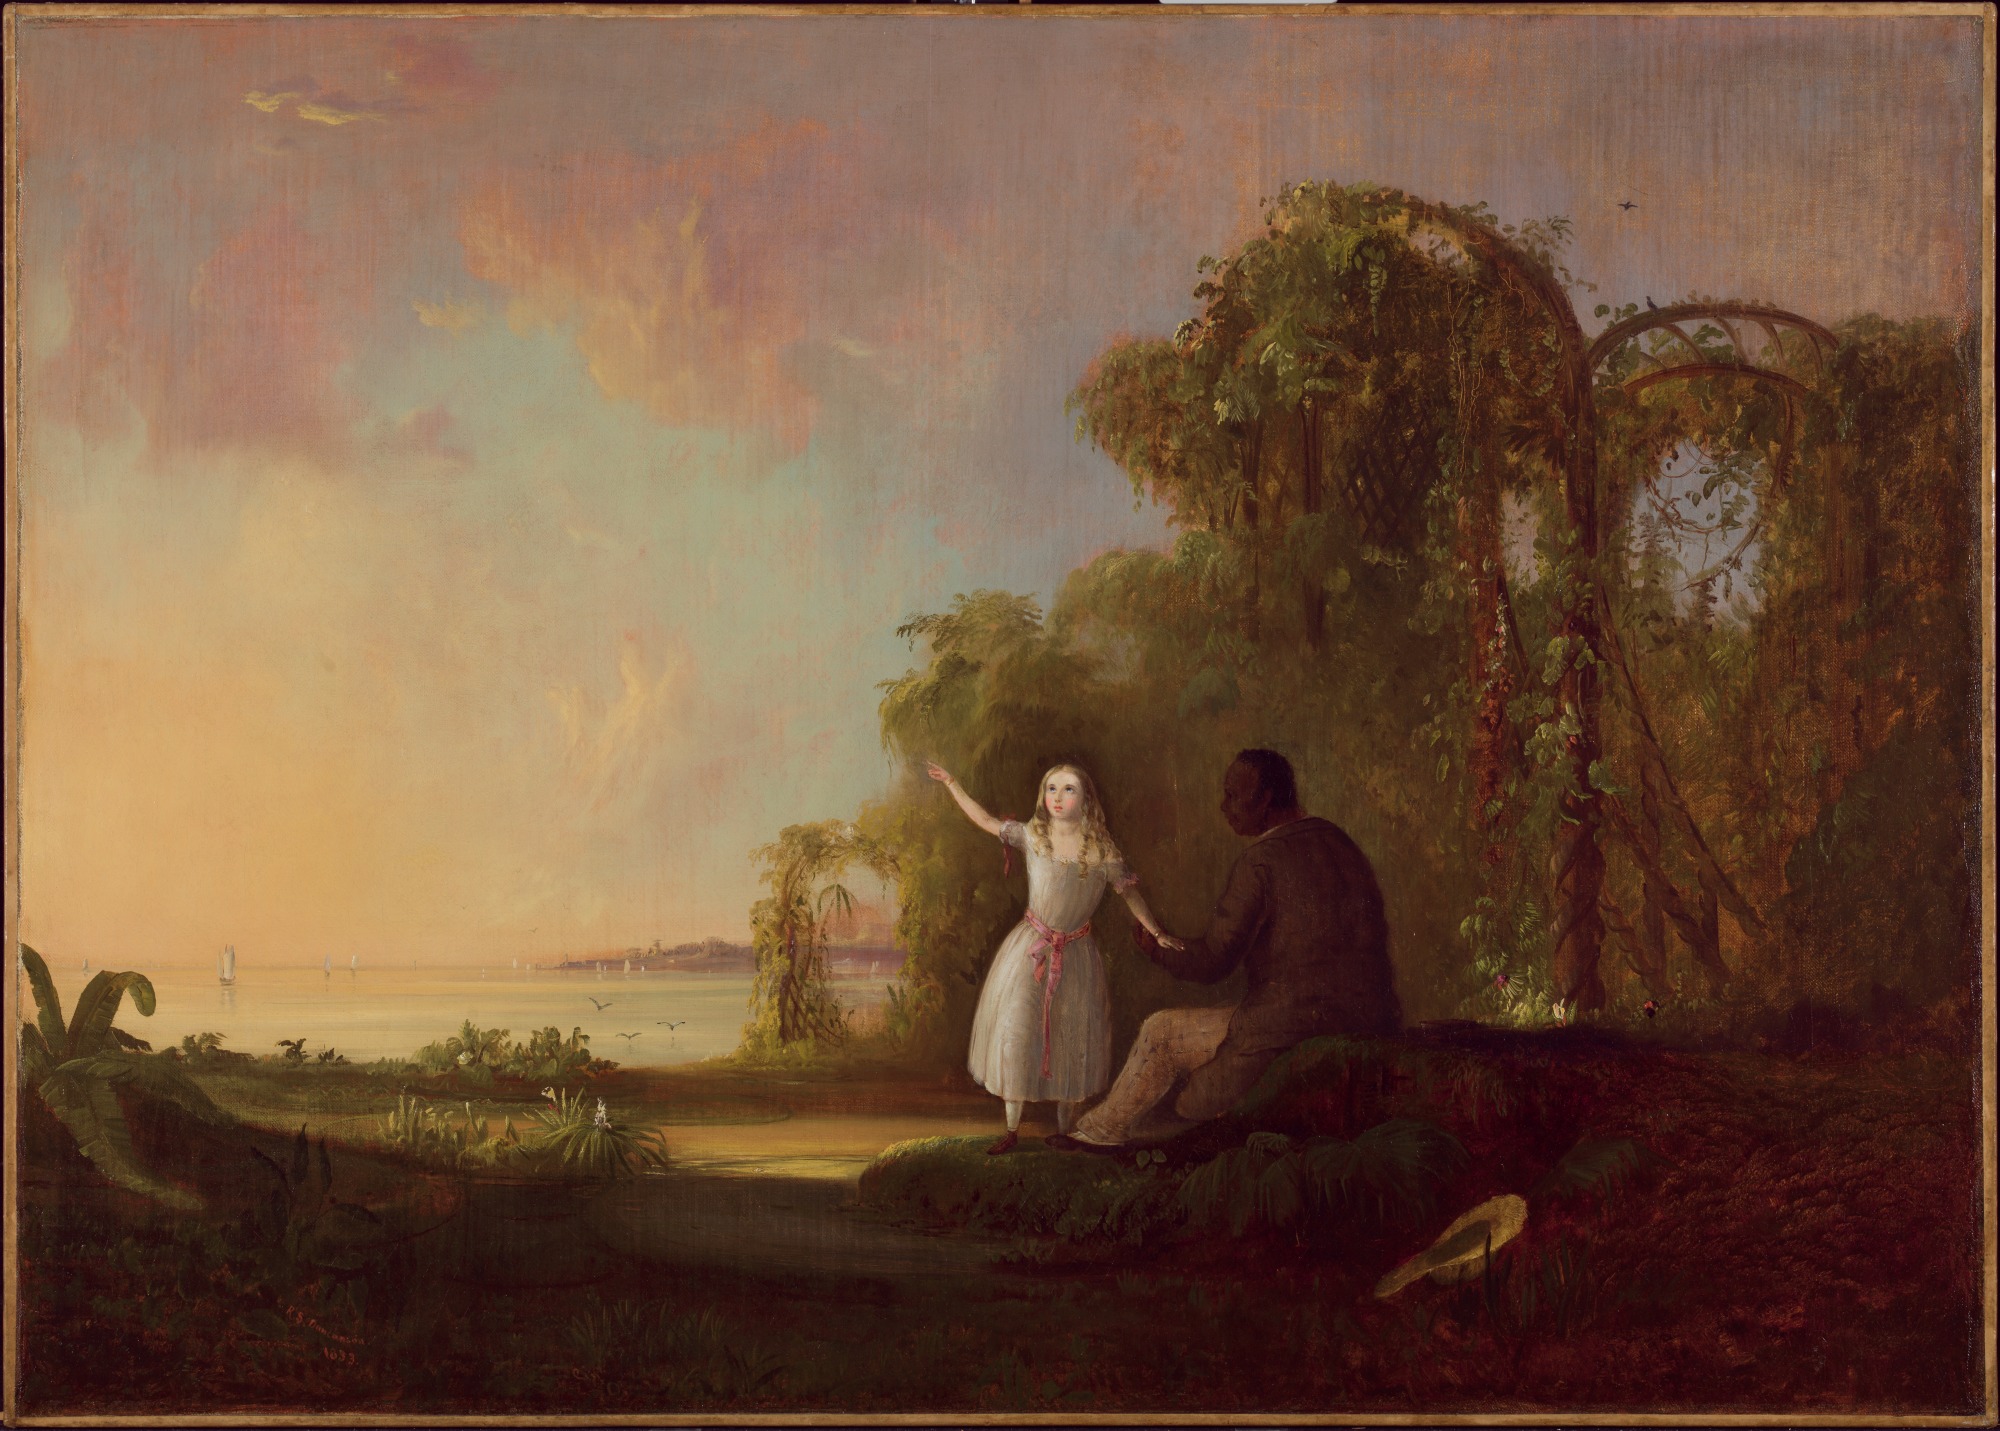 Robert S. Duncanson, Uncle Tom and Little Eva, 1853, oil on canvas. Detroit Institute of Arts, Gift of Mrs. Jefferson Butler and Miss Grace R. Conover, 49.498